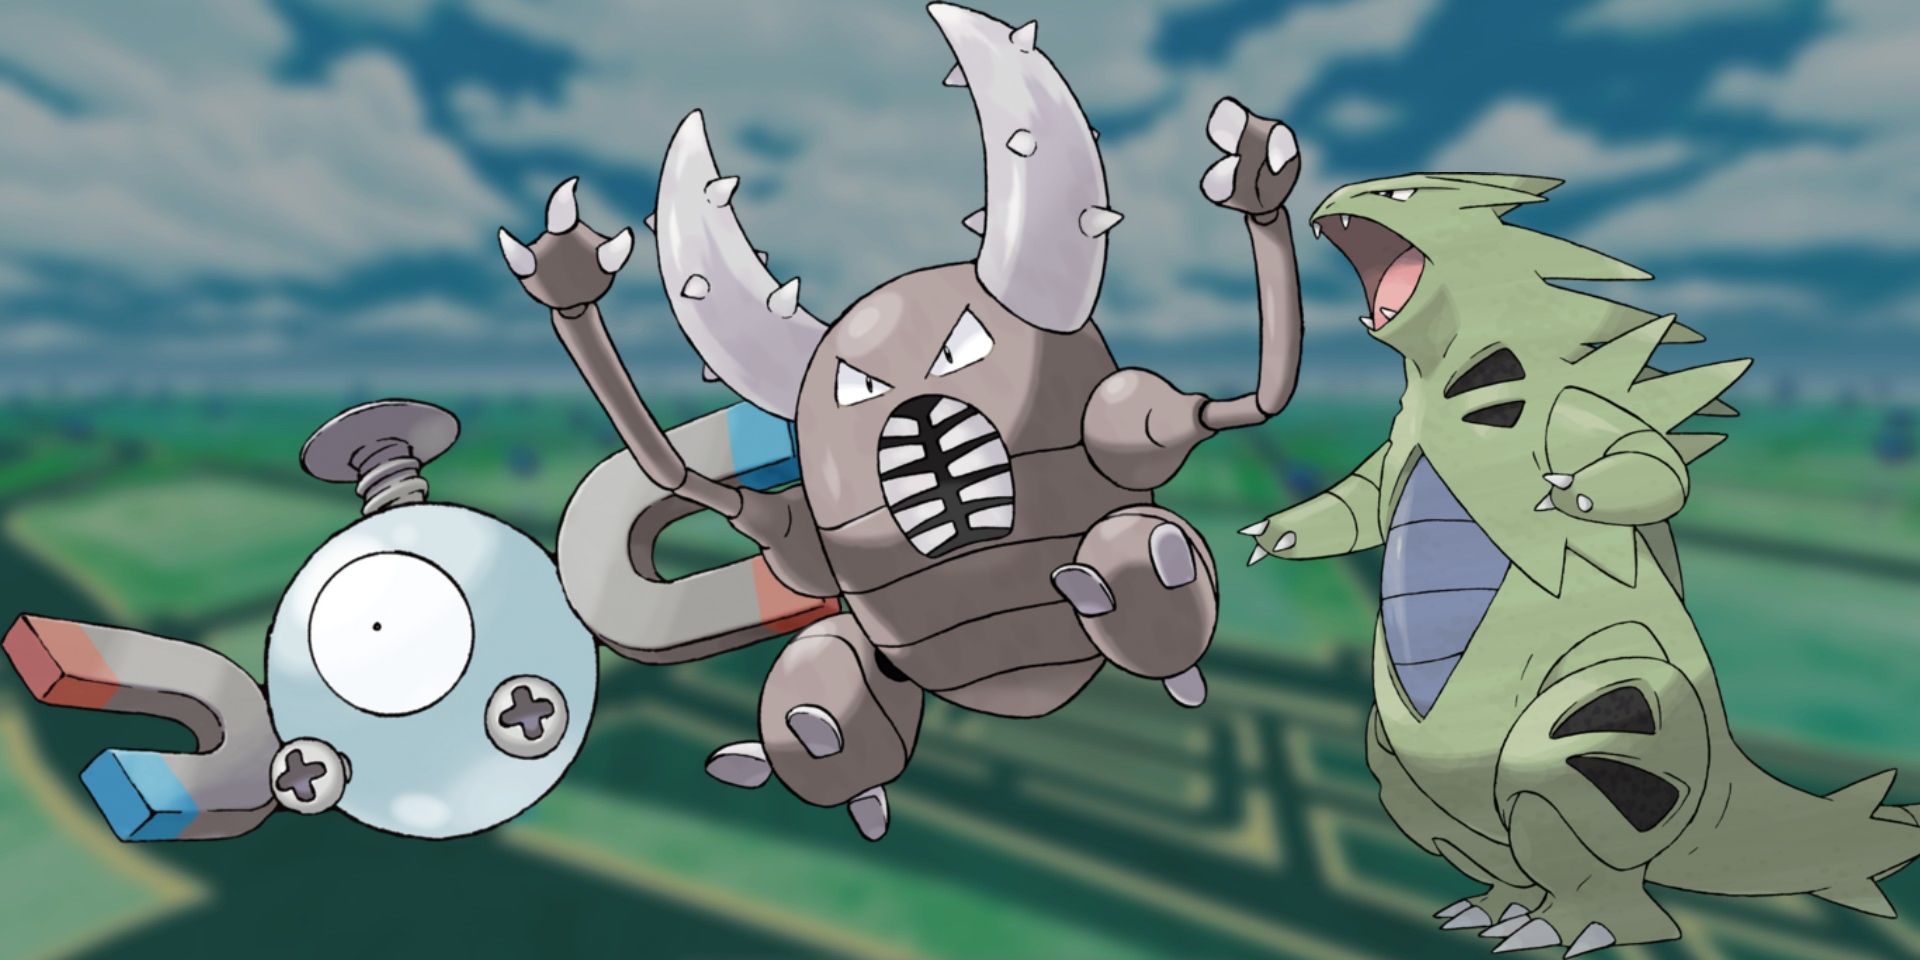 Pokemon GO's map in the background with a superimposed Magnemite, Pinsir, and Tyranitar, representing Cliff's possible team in April 2023.